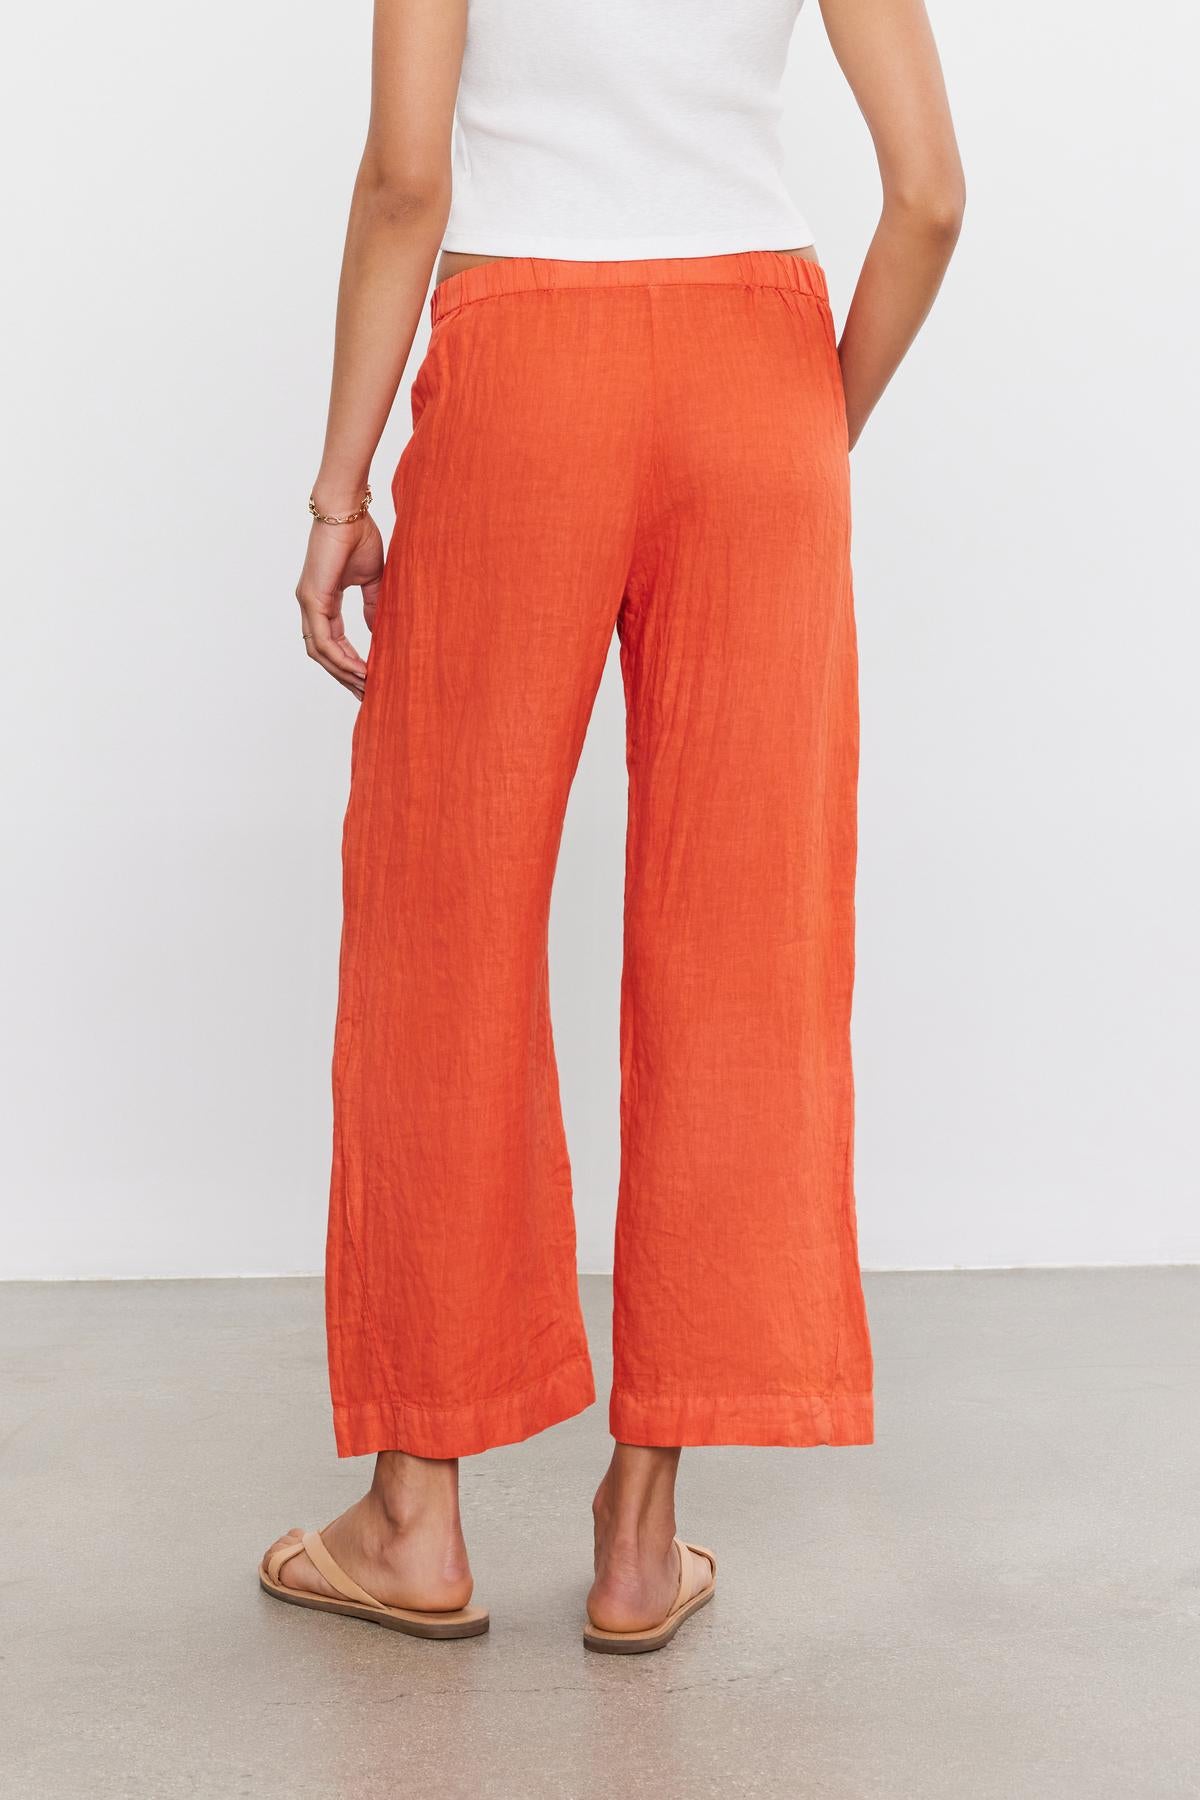   A person is standing, facing away, wearing bright orange LOLA LINEN PANT by Velvet by Graham & Spencer paired with a white top and beige flip-flops. 